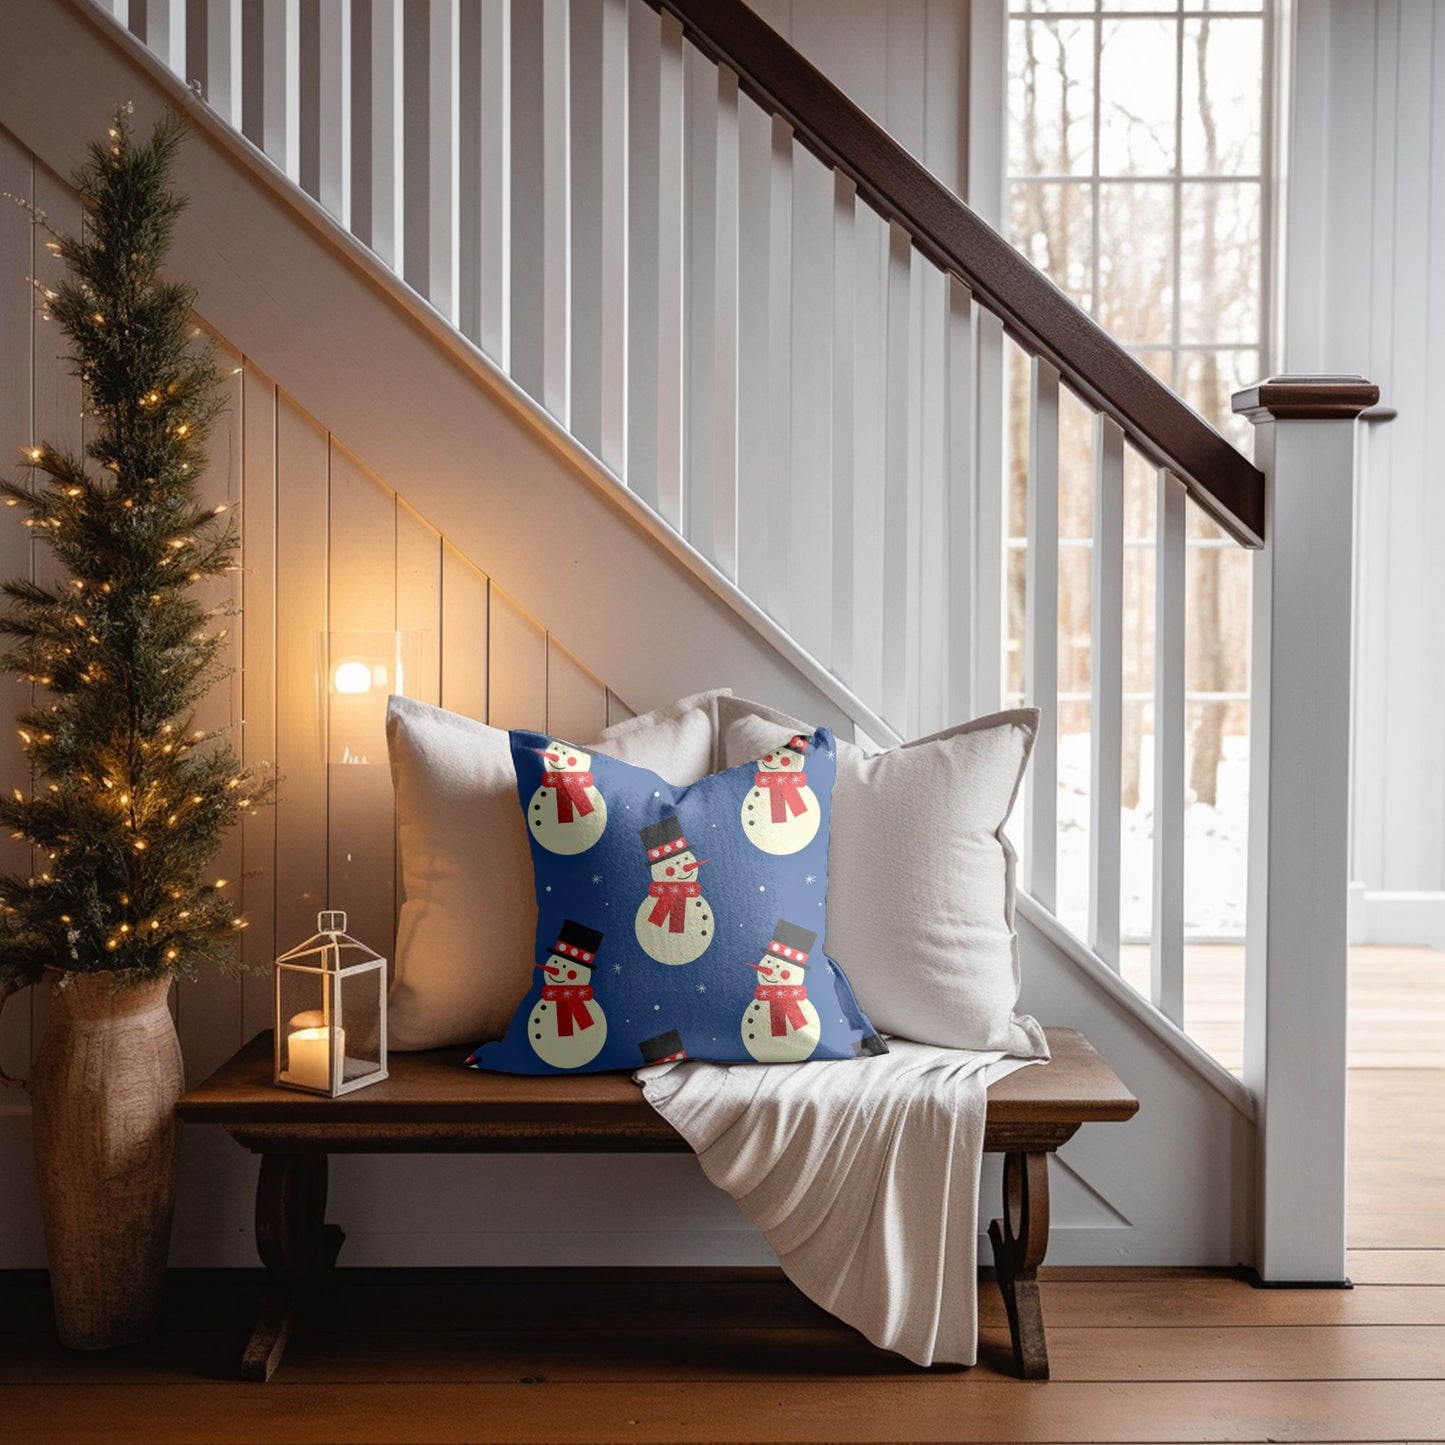 Snowman Happiness in a Decorative Pillow